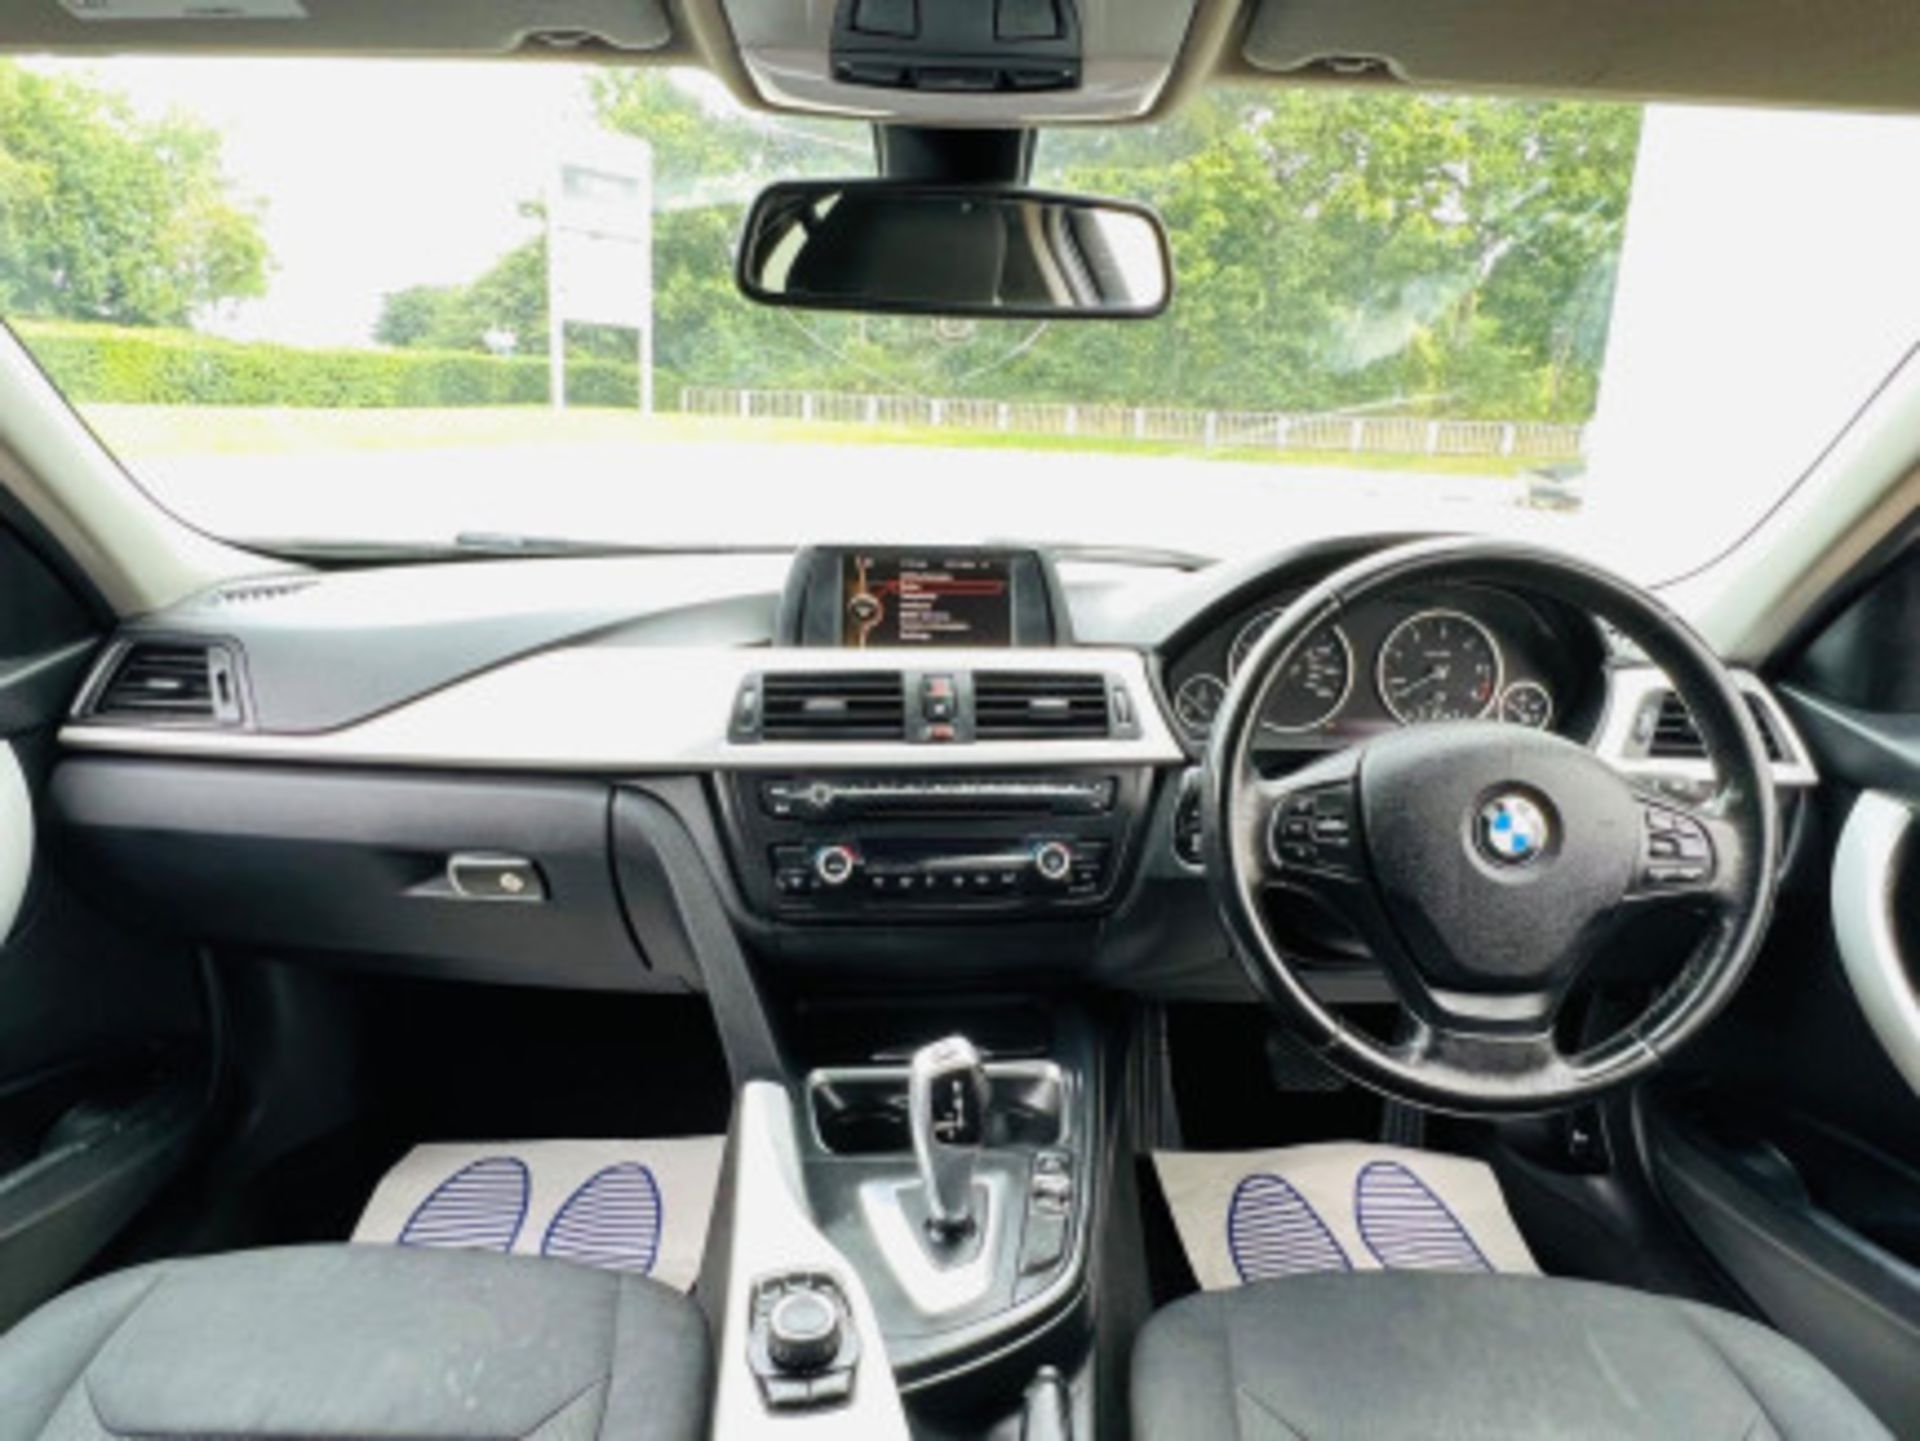 BMW 3 SERIES 2.0 DIESEL ED START STOP - A WELL-MAINTAINED GEM >>--NO VAT ON HAMMER--<< - Image 31 of 229